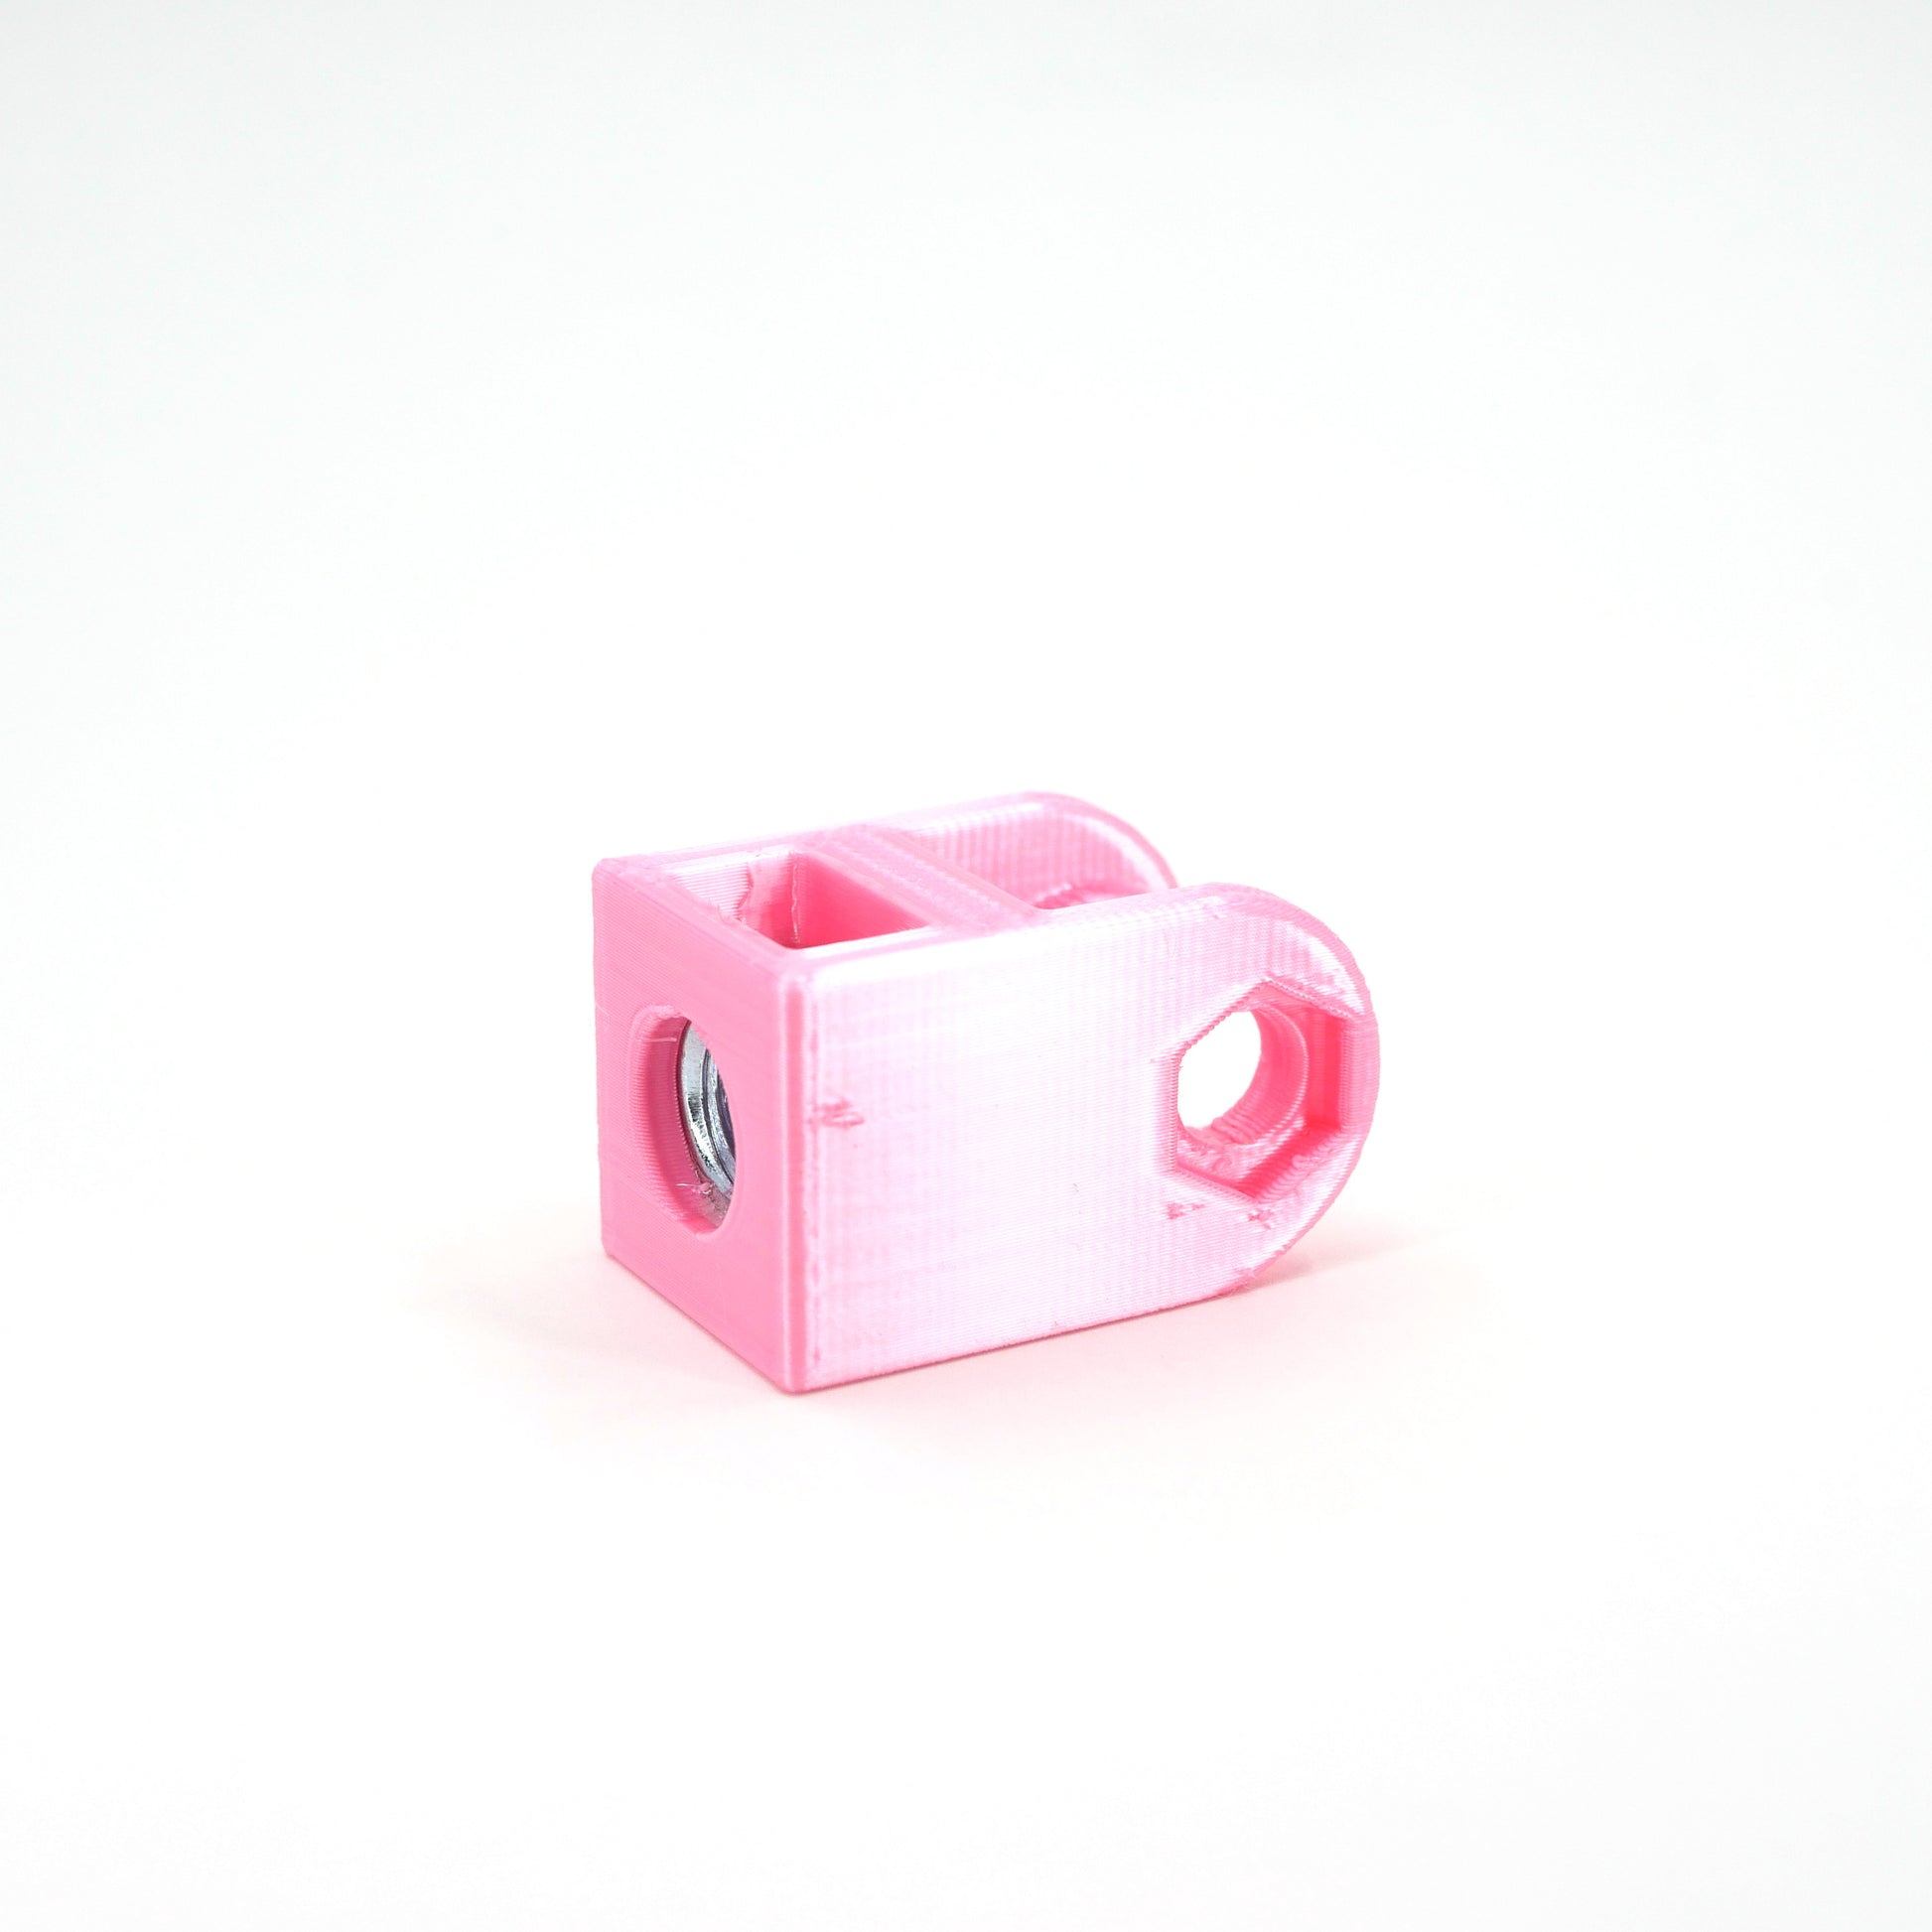 A pink HyperX DuoCast microphone mount adapter sitting at an angle.